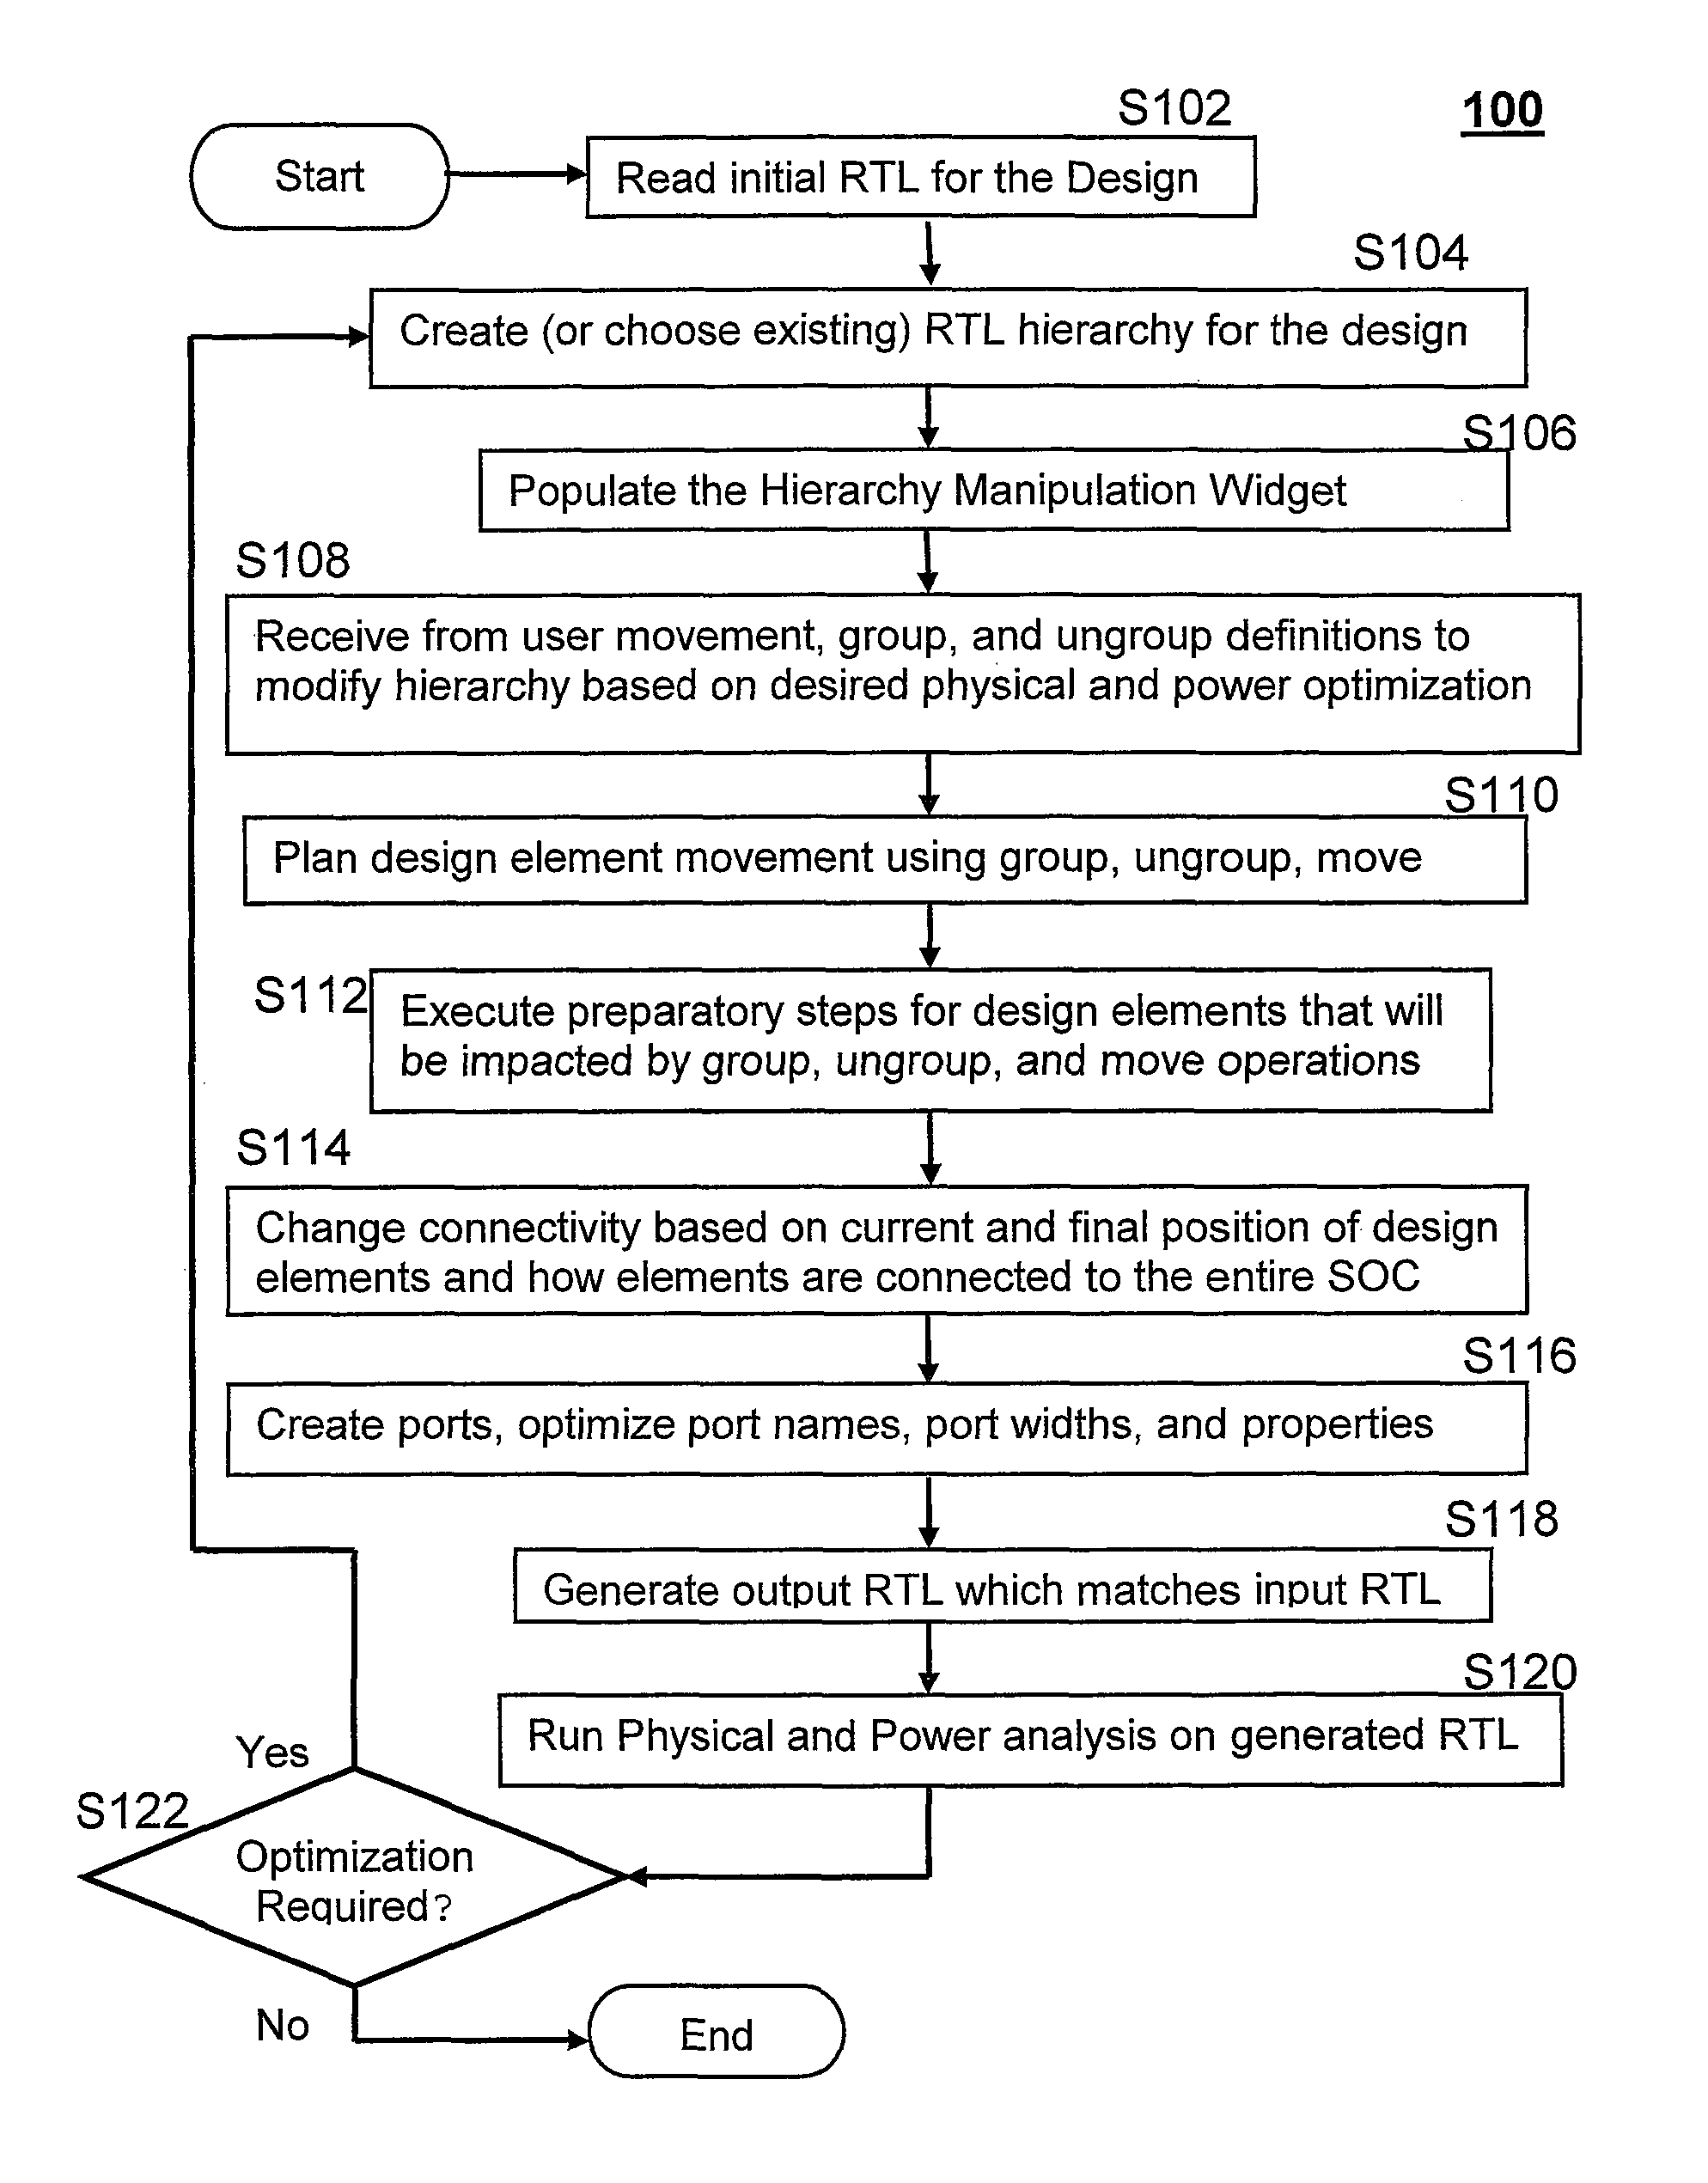 System and method for altering circuit design hierarchy to optimize routing and power distribution using initial RTL-level circuit description netlist